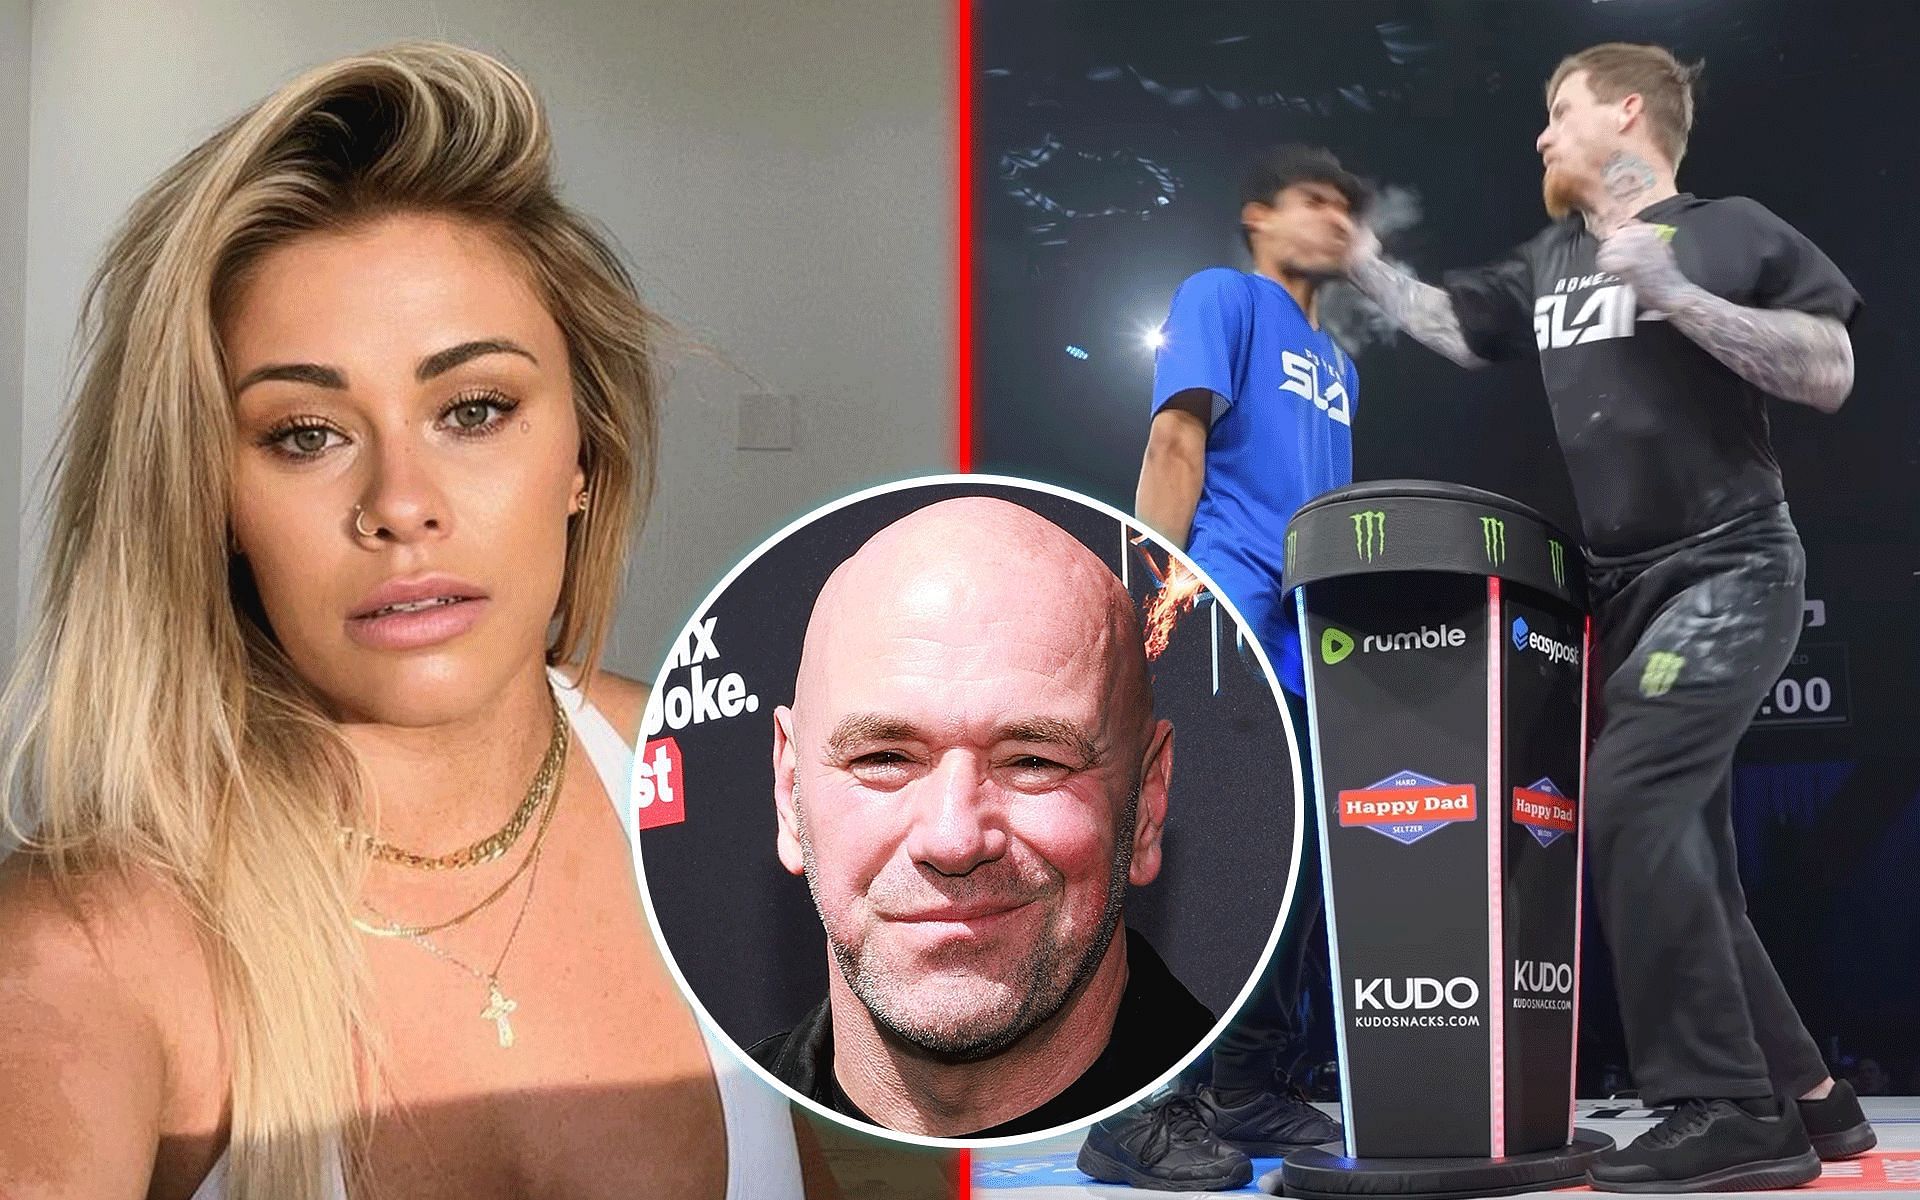 Dana White (Inset) speaks about the Power Slap debut of Paige VanZant (left) and Vasily Kamotsky (right) [Images courtesy: @paigevanzant and @powerslap on Instagram]